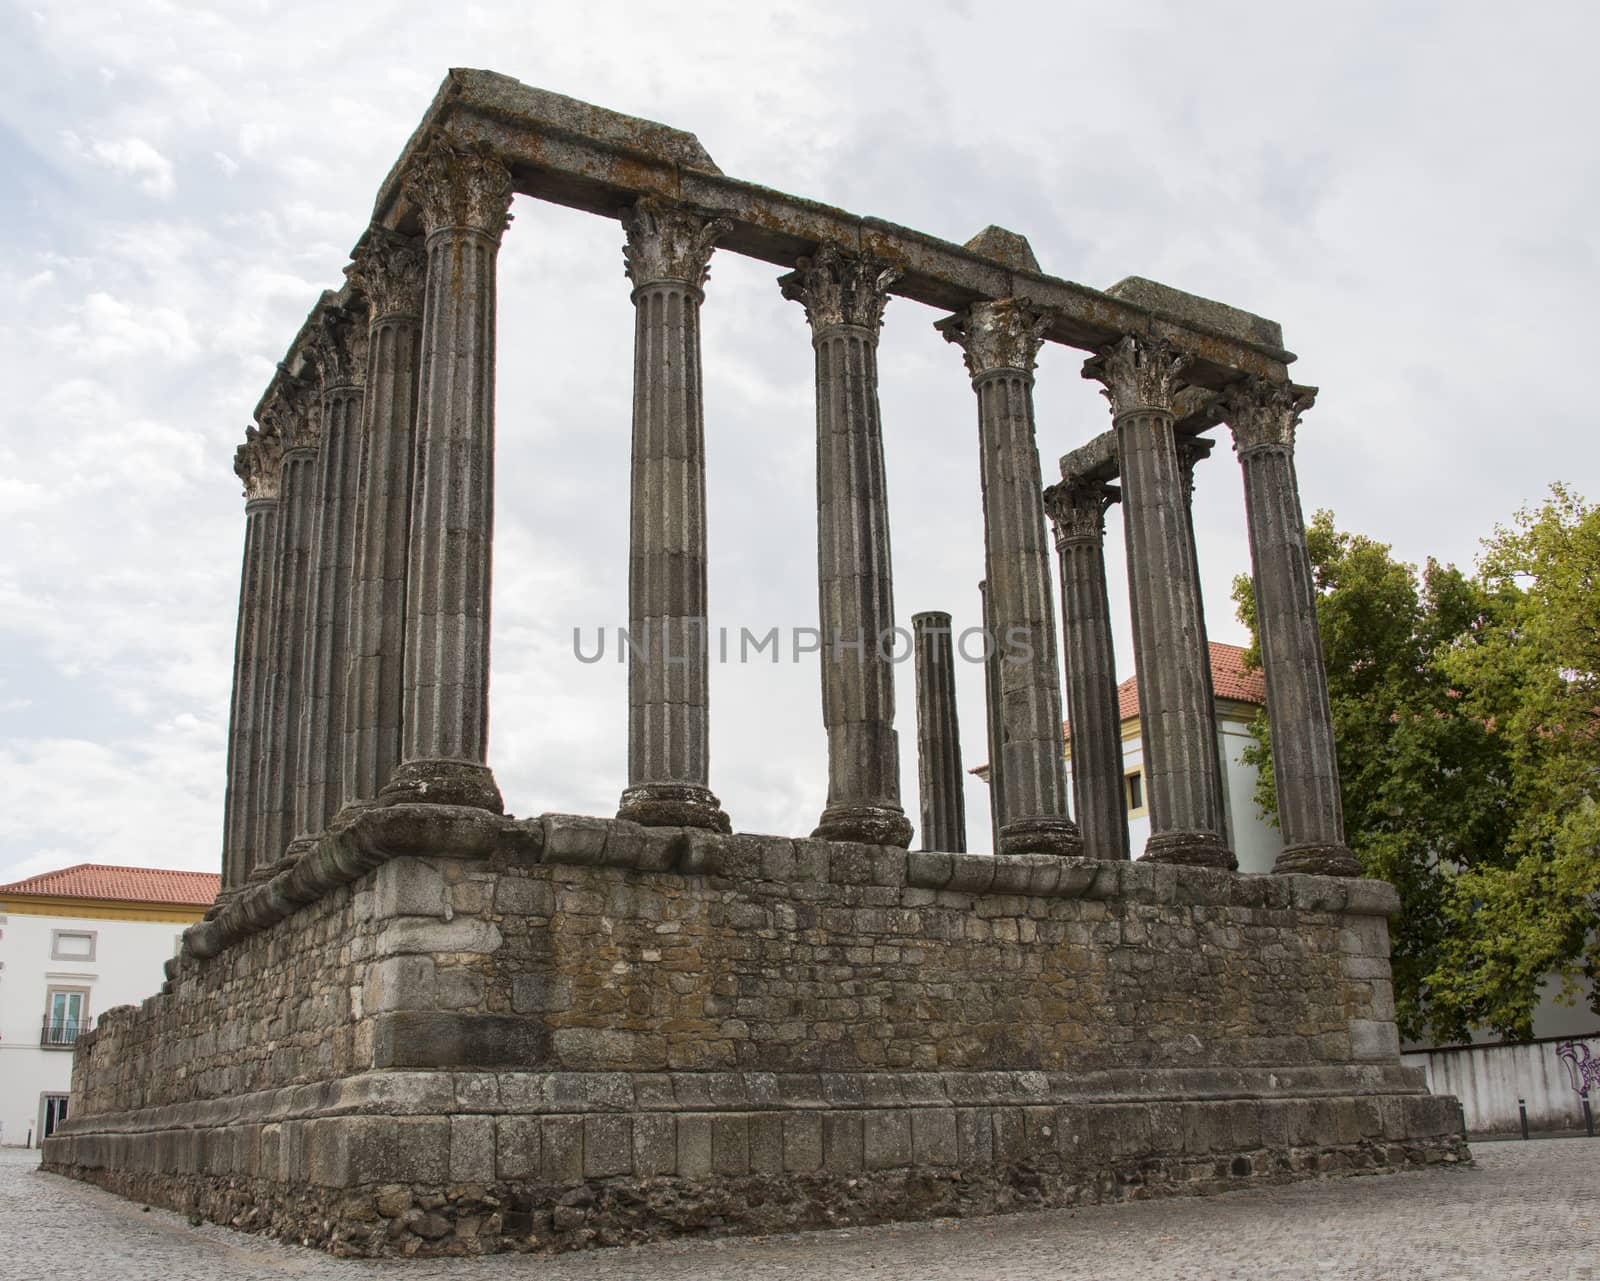 The Roman Temple of Evora also referred to as the Templo de Diana is an ancient temple in the Portuguese city of Evora